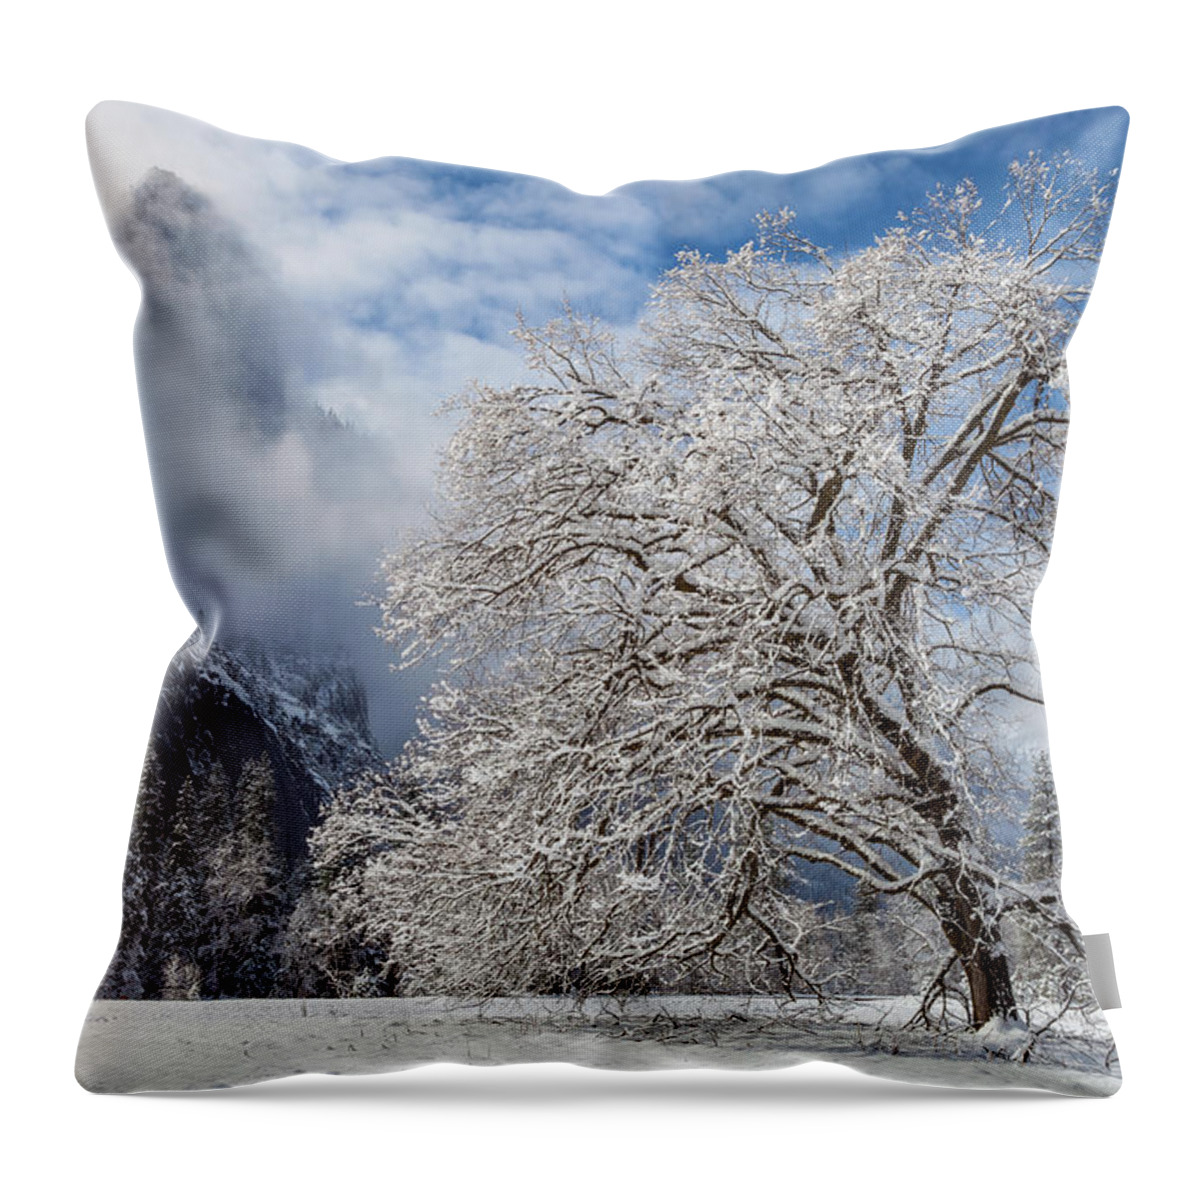 Landscape Throw Pillow featuring the photograph Winter Arrived by Jonathan Nguyen